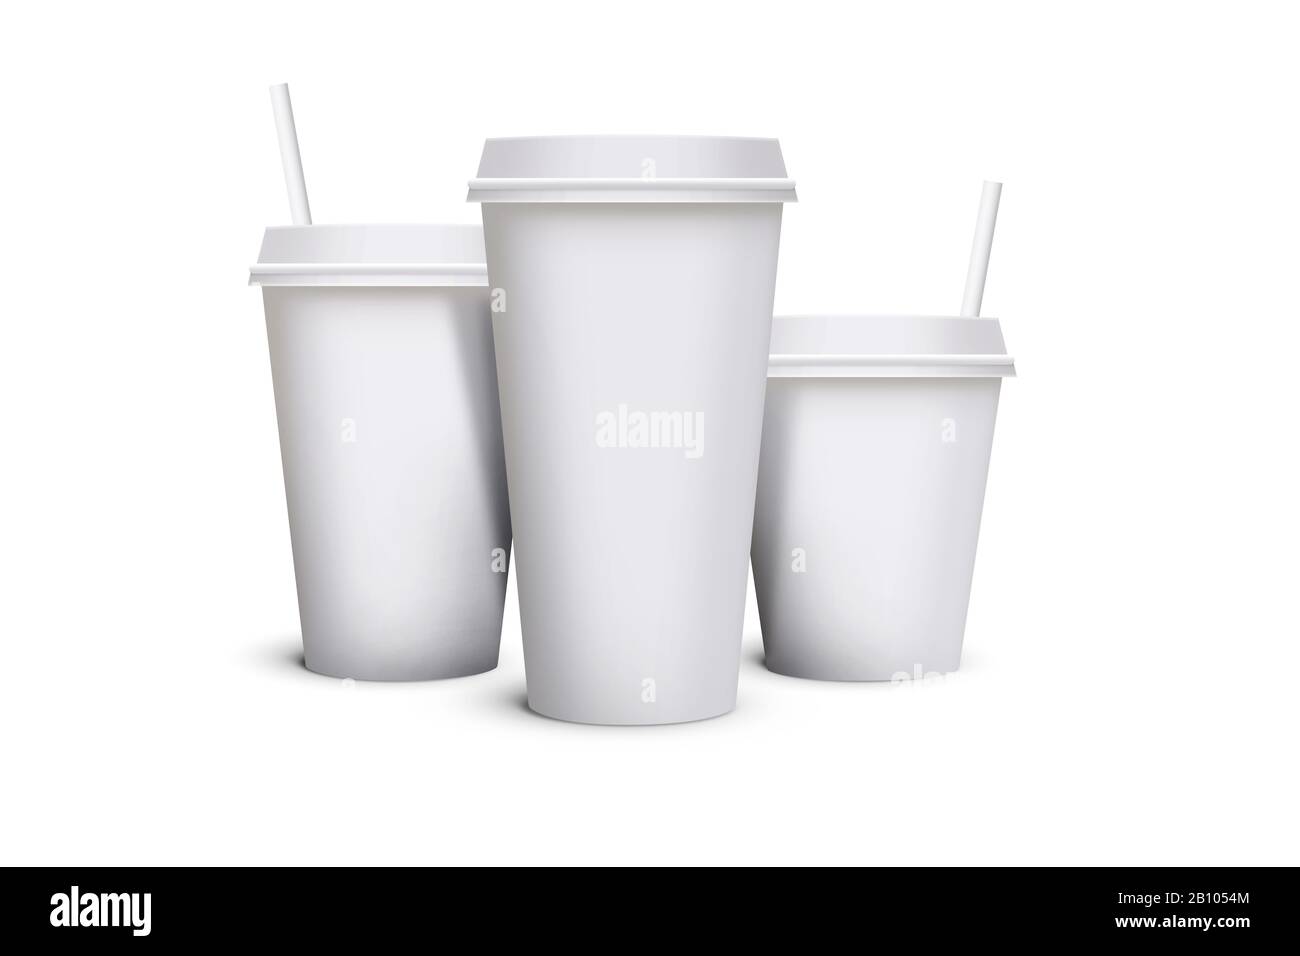 https://c8.alamy.com/comp/2B1054M/3d-illustration-of-white-blank-takeaway-paper-carton-coffee-or-tea-cup-with-straw-in-different-size-on-isolated-white-background-for-presentation-use-2B1054M.jpg